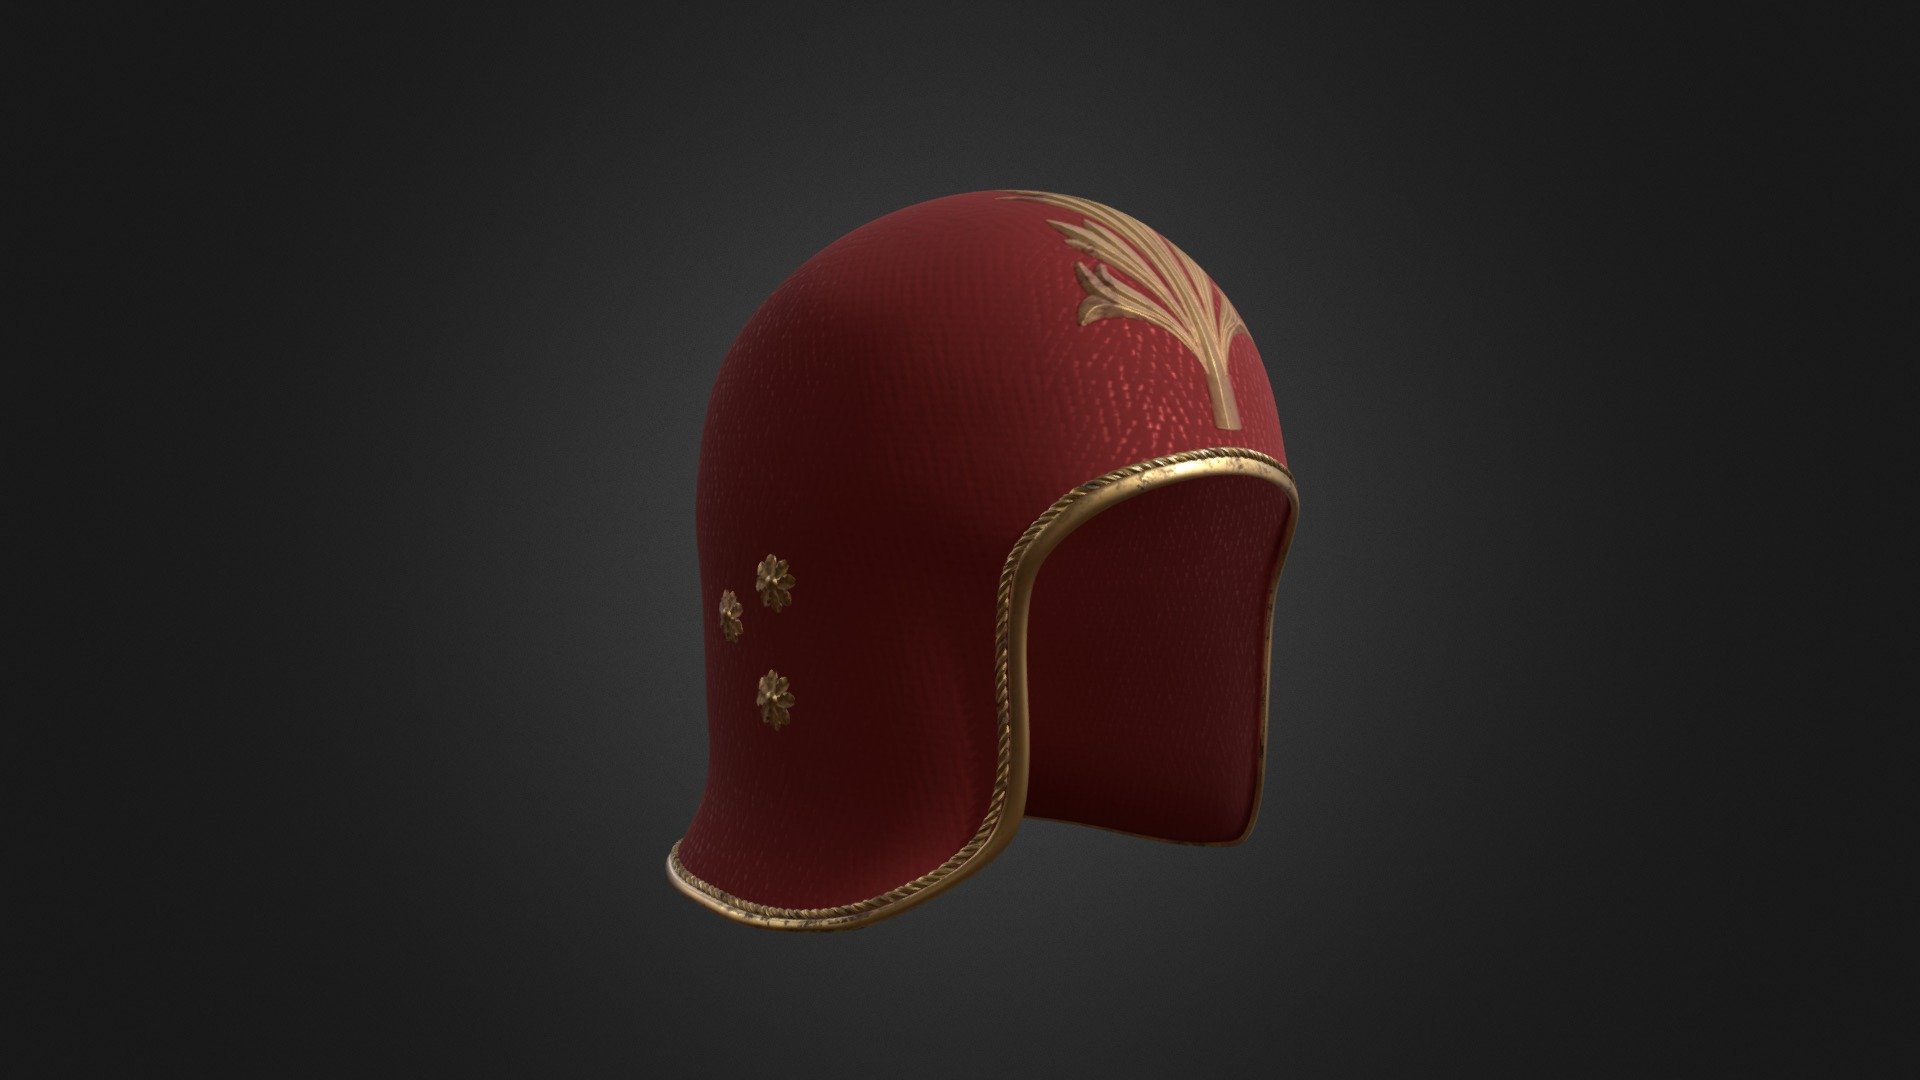 A renaissance period helmet based on the Venetian style found in the Arsenale 3d model